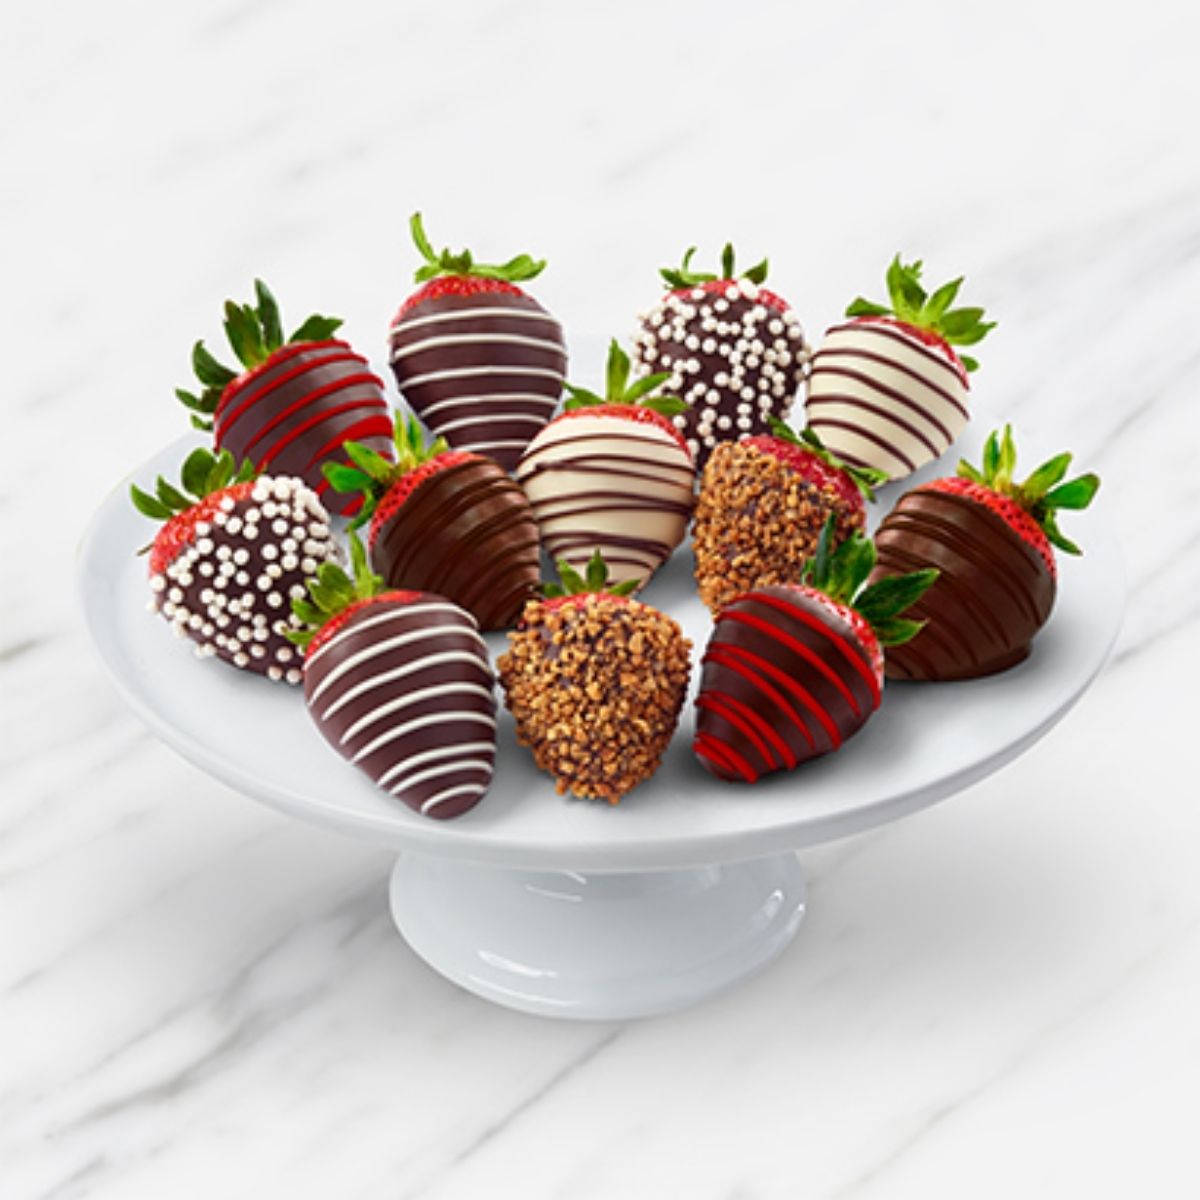 The Best Gifts for Wine Lovers Option: The Ultimate Strawberry Sampler